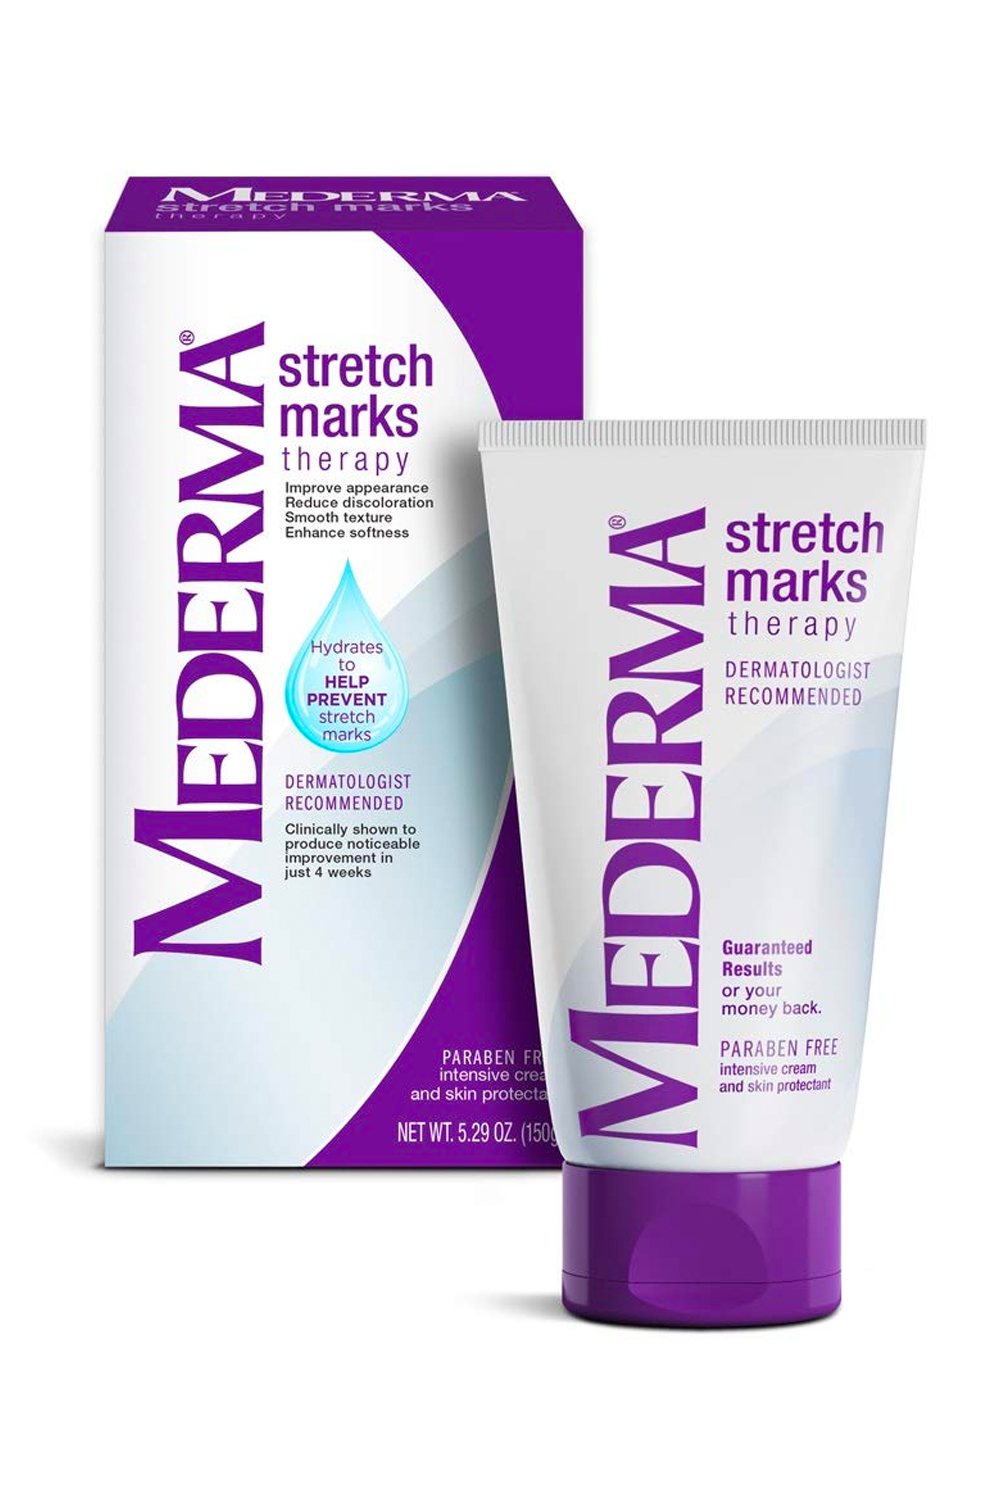 What are Stretch Marks? | LloydsPharmacy